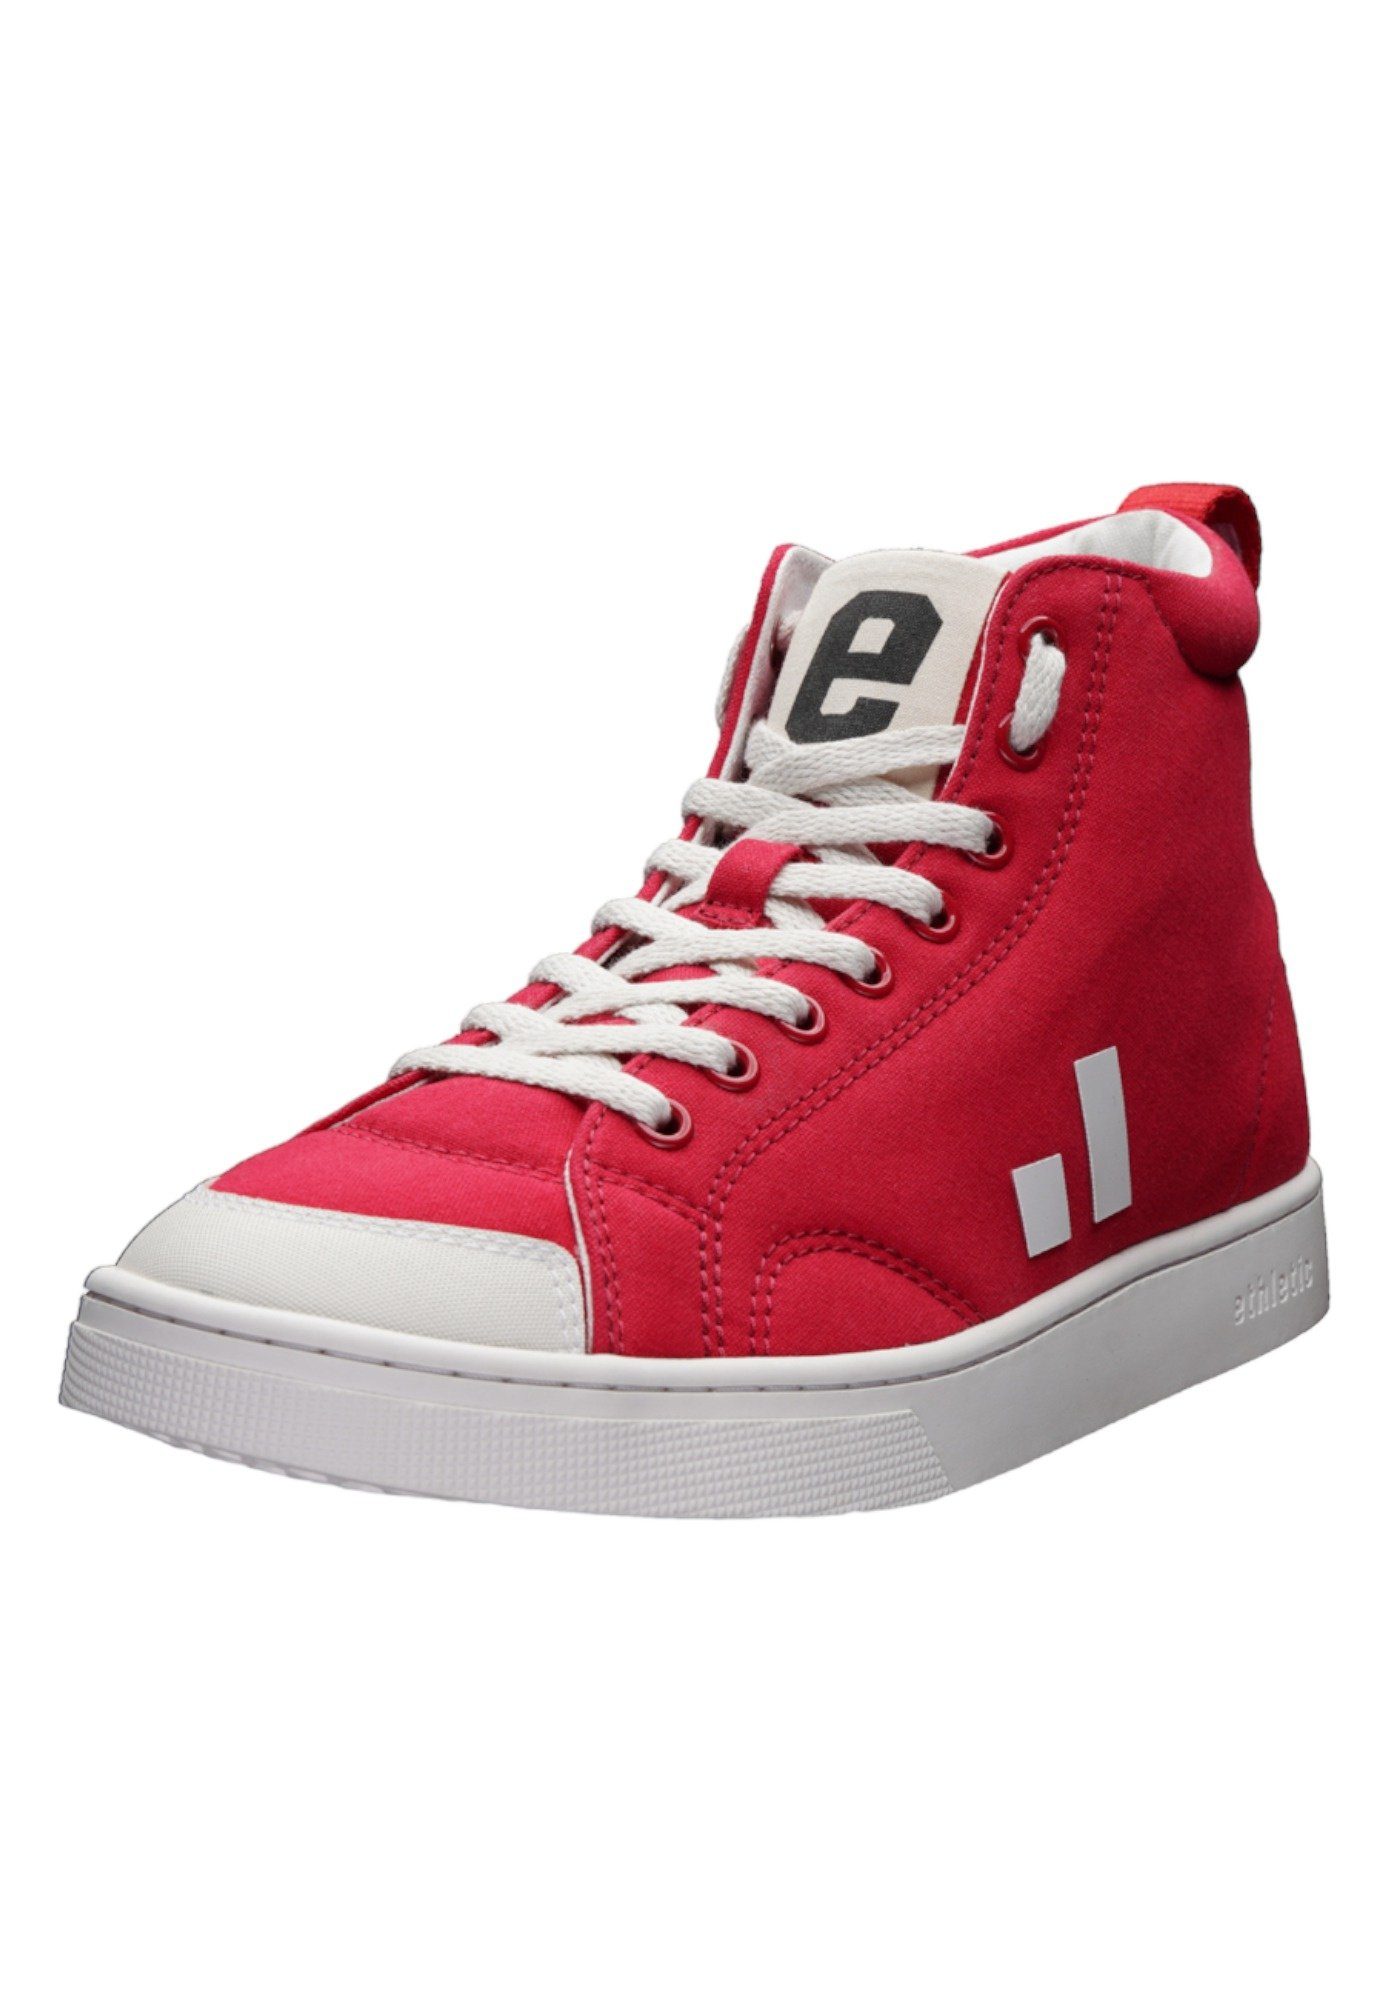 ETHLETIC Active Hi Cut Sneaker Fairtrade Produkt Cranberry Red - Just White